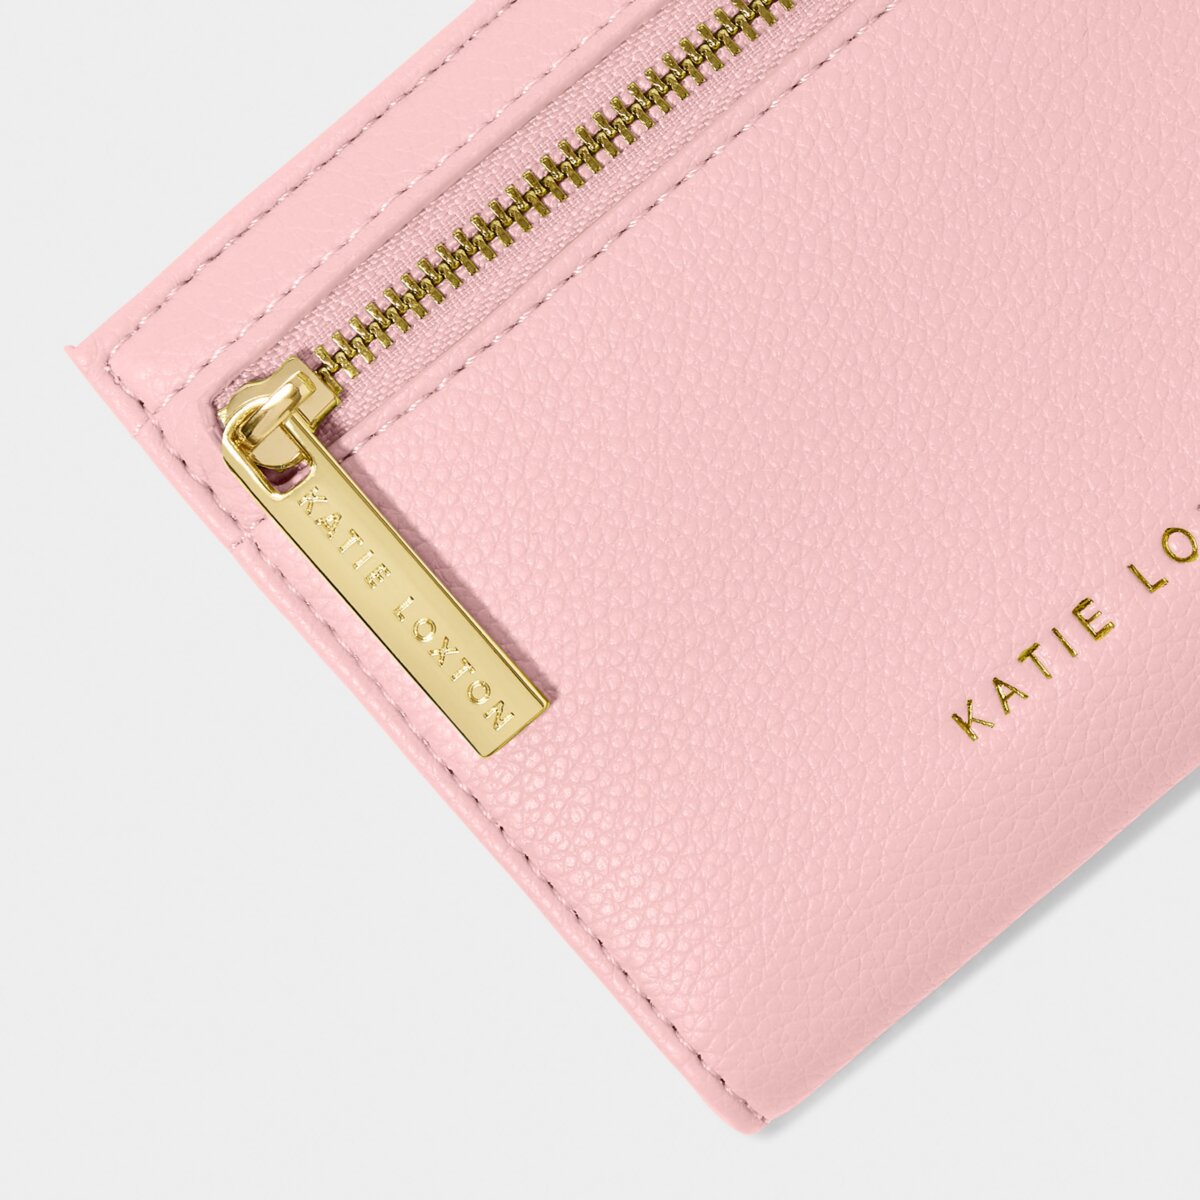 Close up of the Katie Loxton Jayde purse. There is particular focus on the zip, which has Katie Loxton imprinted on it, as well as Katie Loxton in gold lettering at the base of the purse.